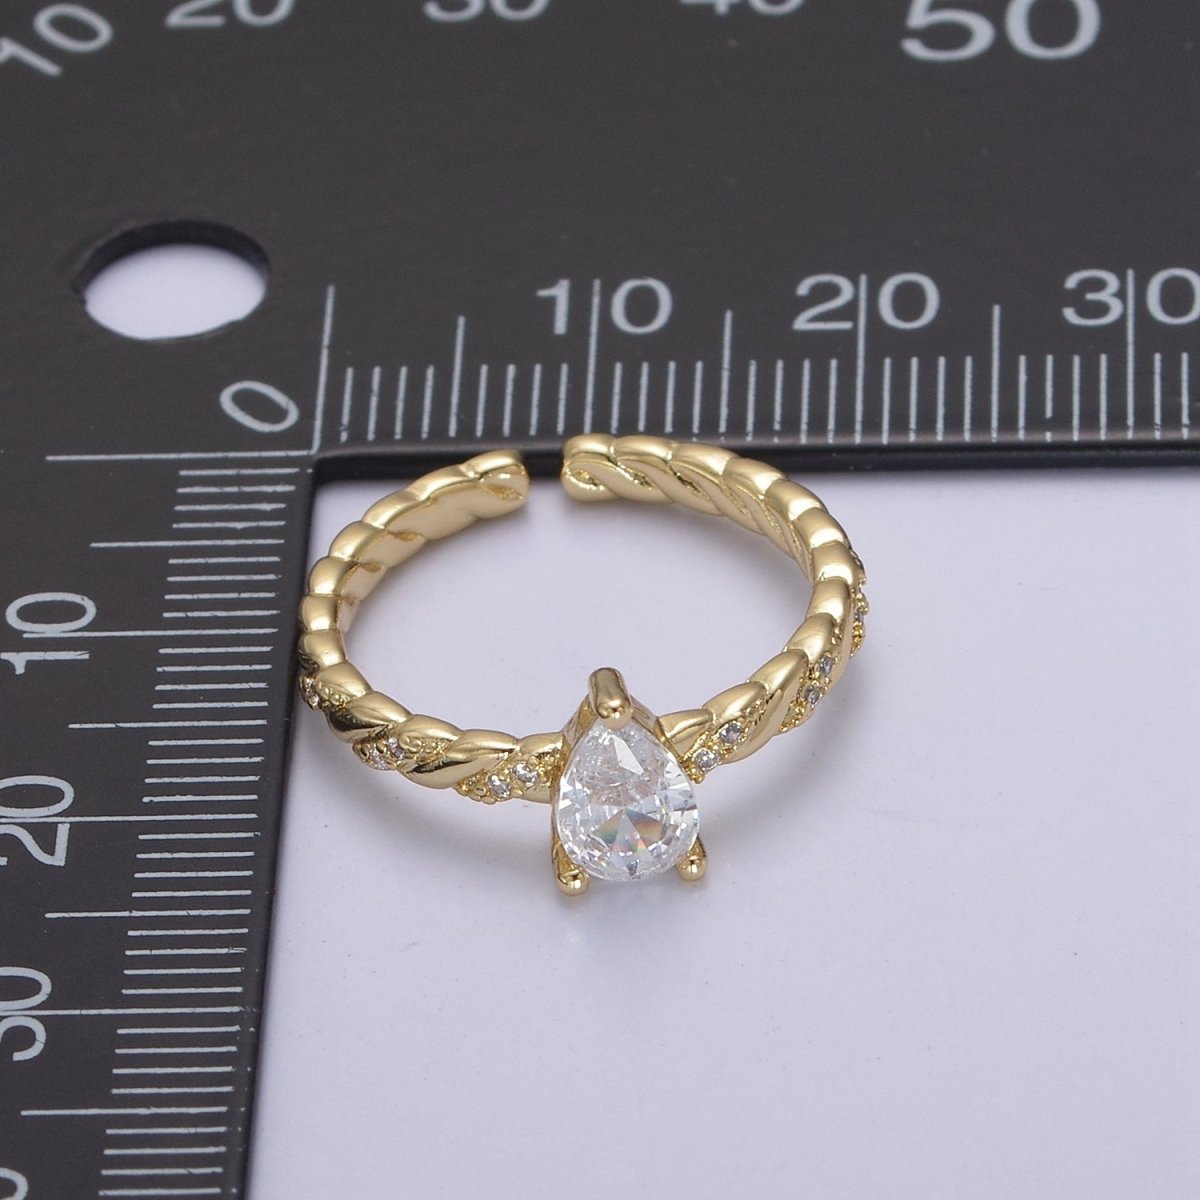 OS Dainty and Minimalist Teardrop CZ Ring , Teardrop ring Gold Filled dainty ring, CZ stones ring, dainty ring, stackable ring, thin ring U-505 - DLUXCA